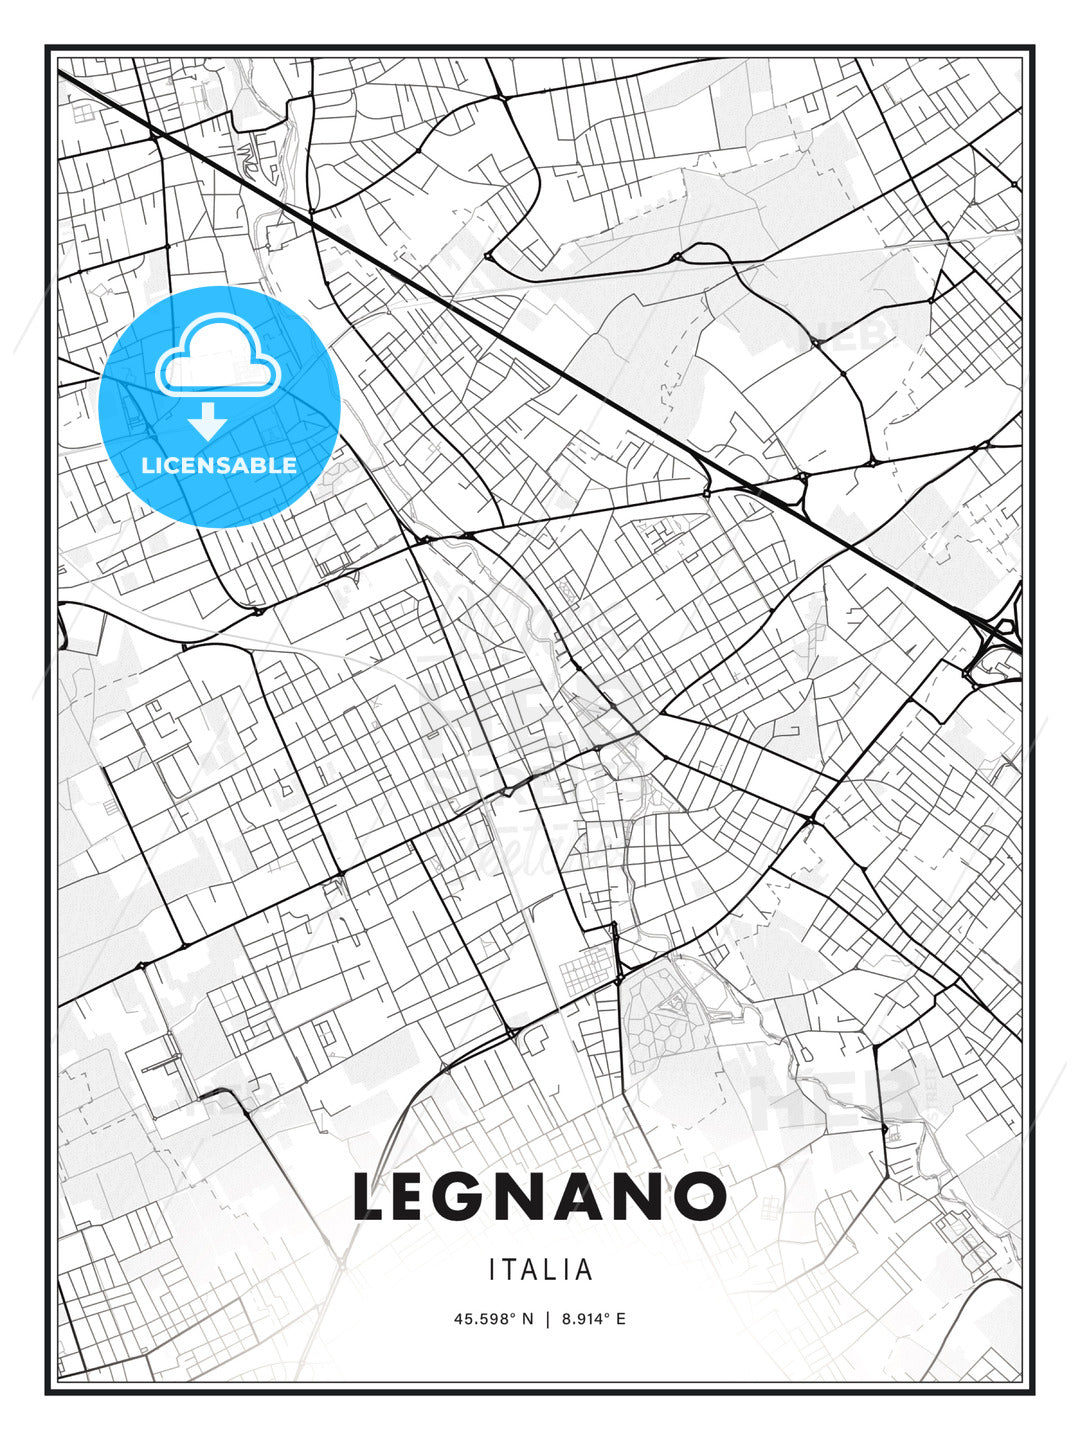 Legnano, Italy, Modern Print Template in Various Formats - HEBSTREITS Sketches